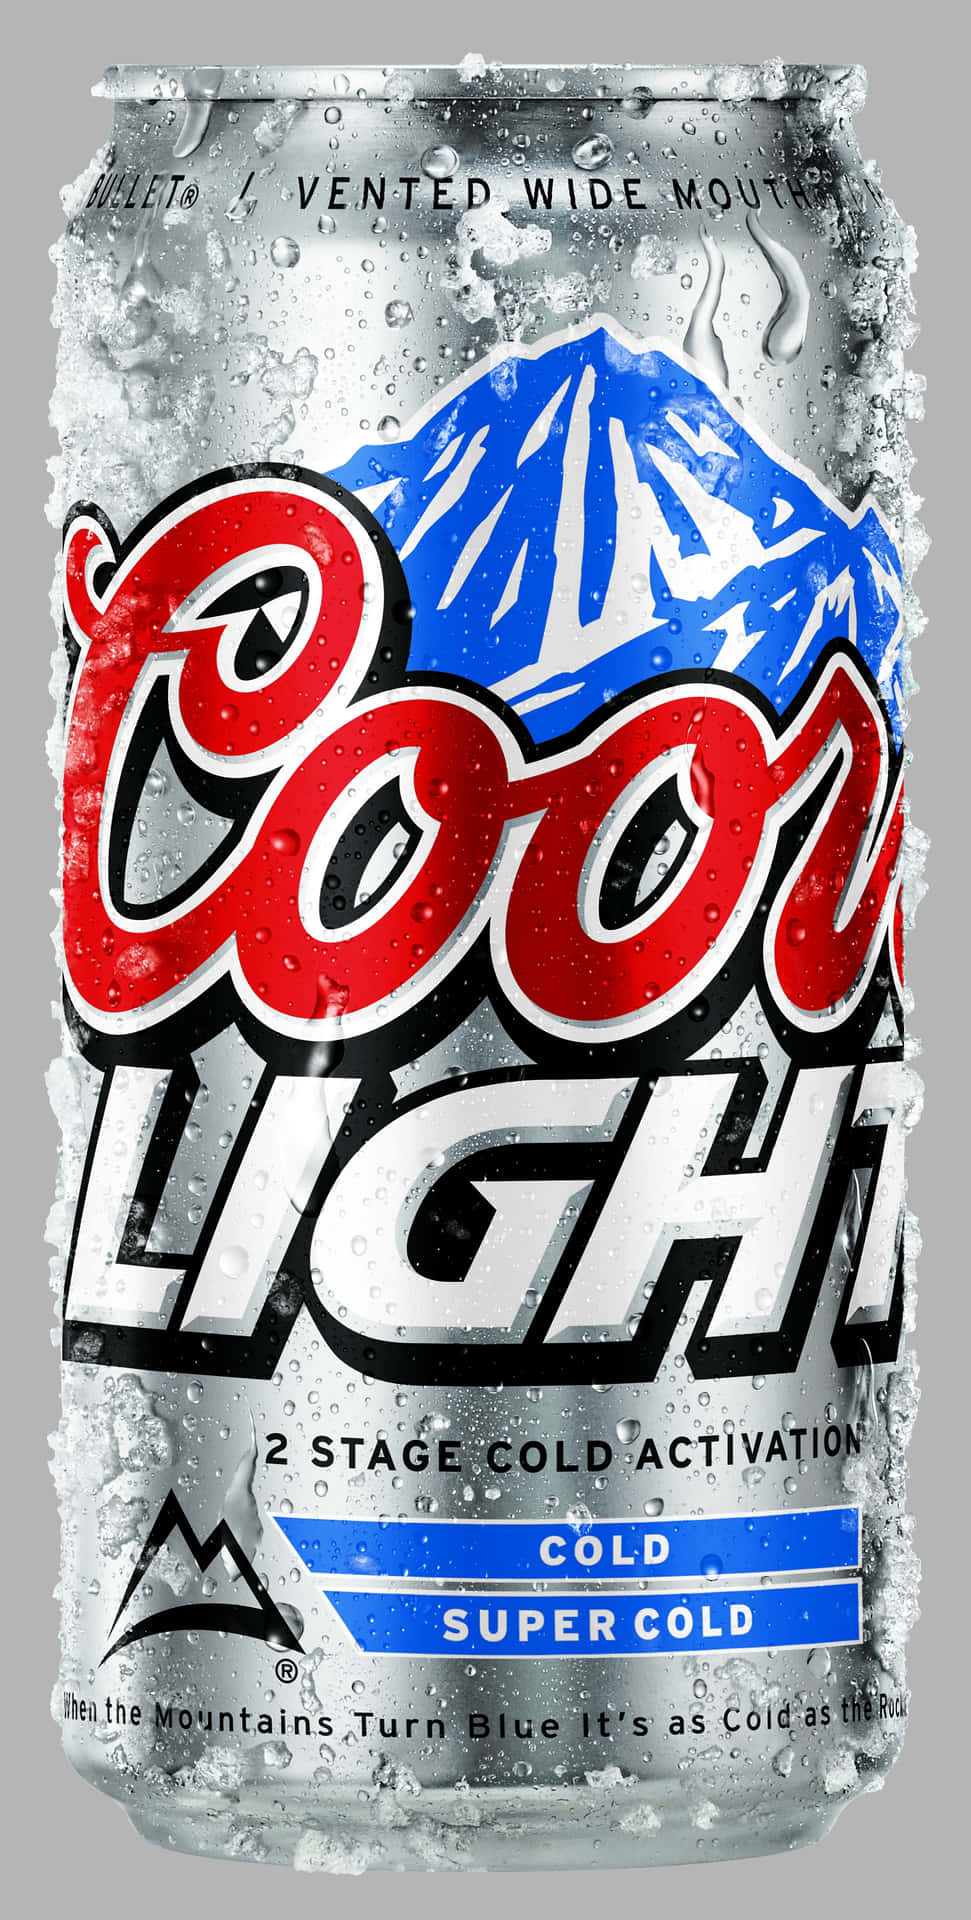 Coors Banquet Rodeo Beer Background DesignCoors Banquet Rodeo Beer Png Banquet Rodeo PngRodeo Beer PngC  Beer background Background design  Photoshop elements